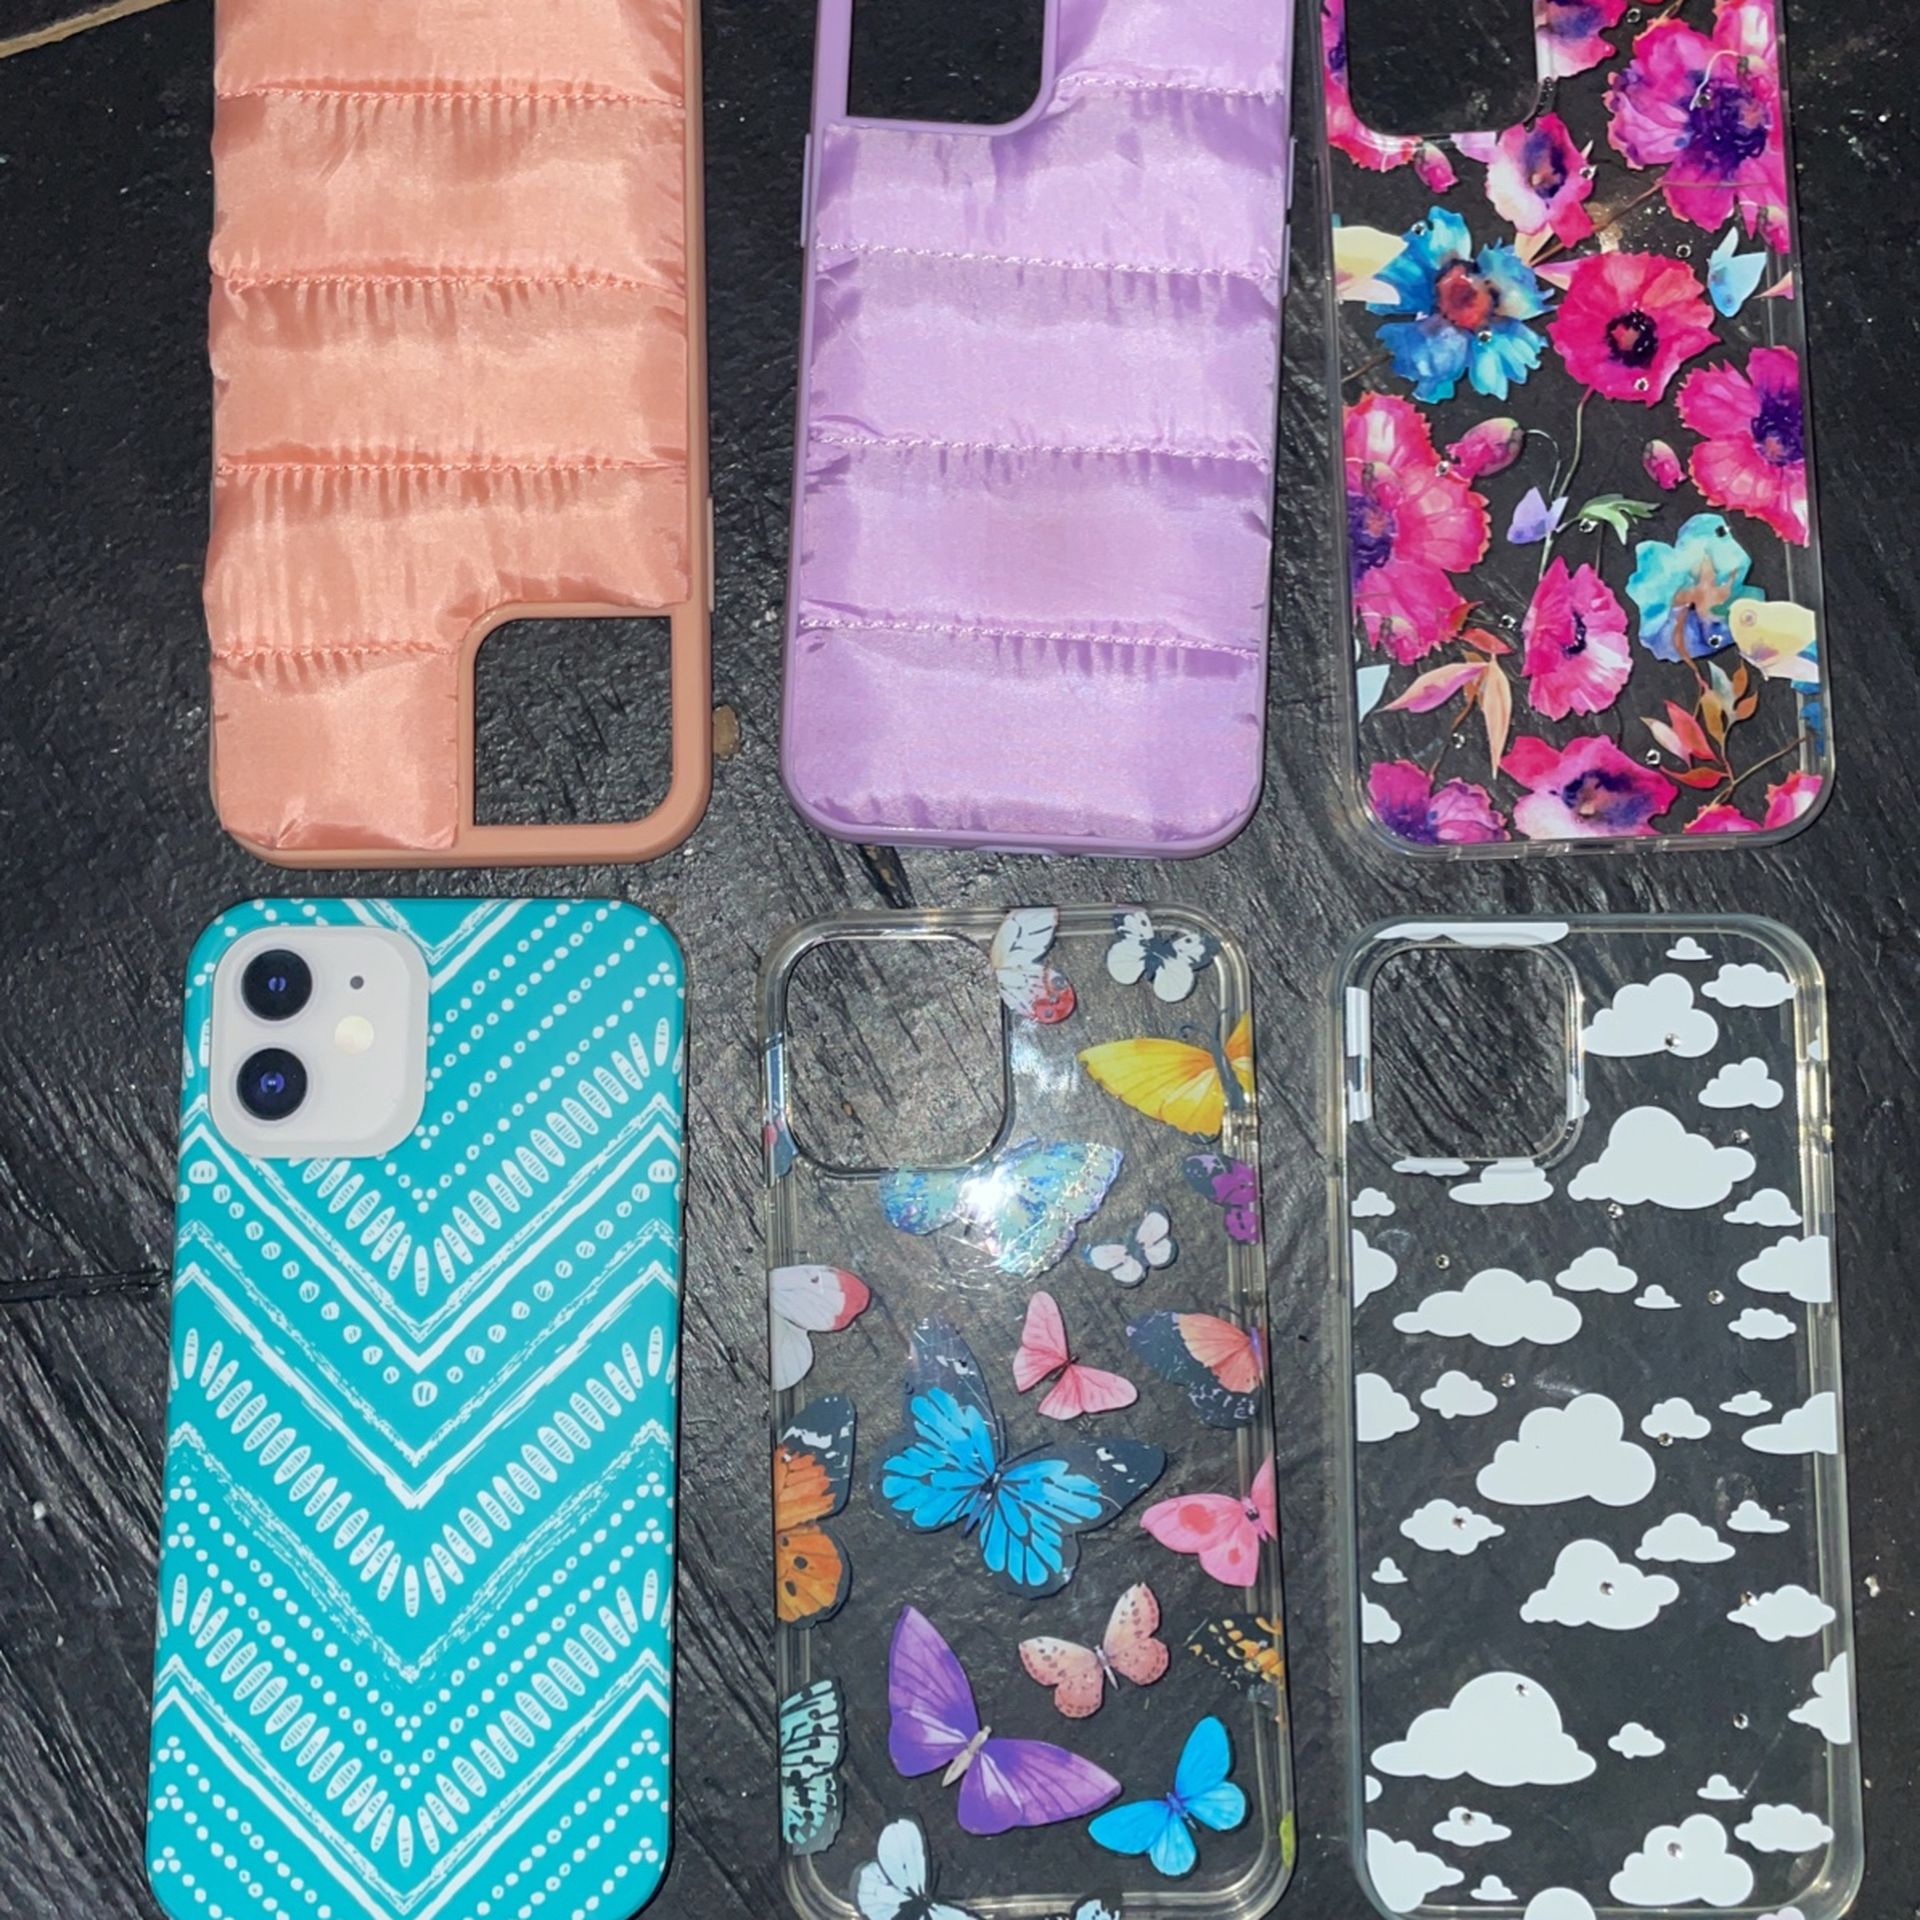 6 iPhone 12 Cases Hardly Ever Used